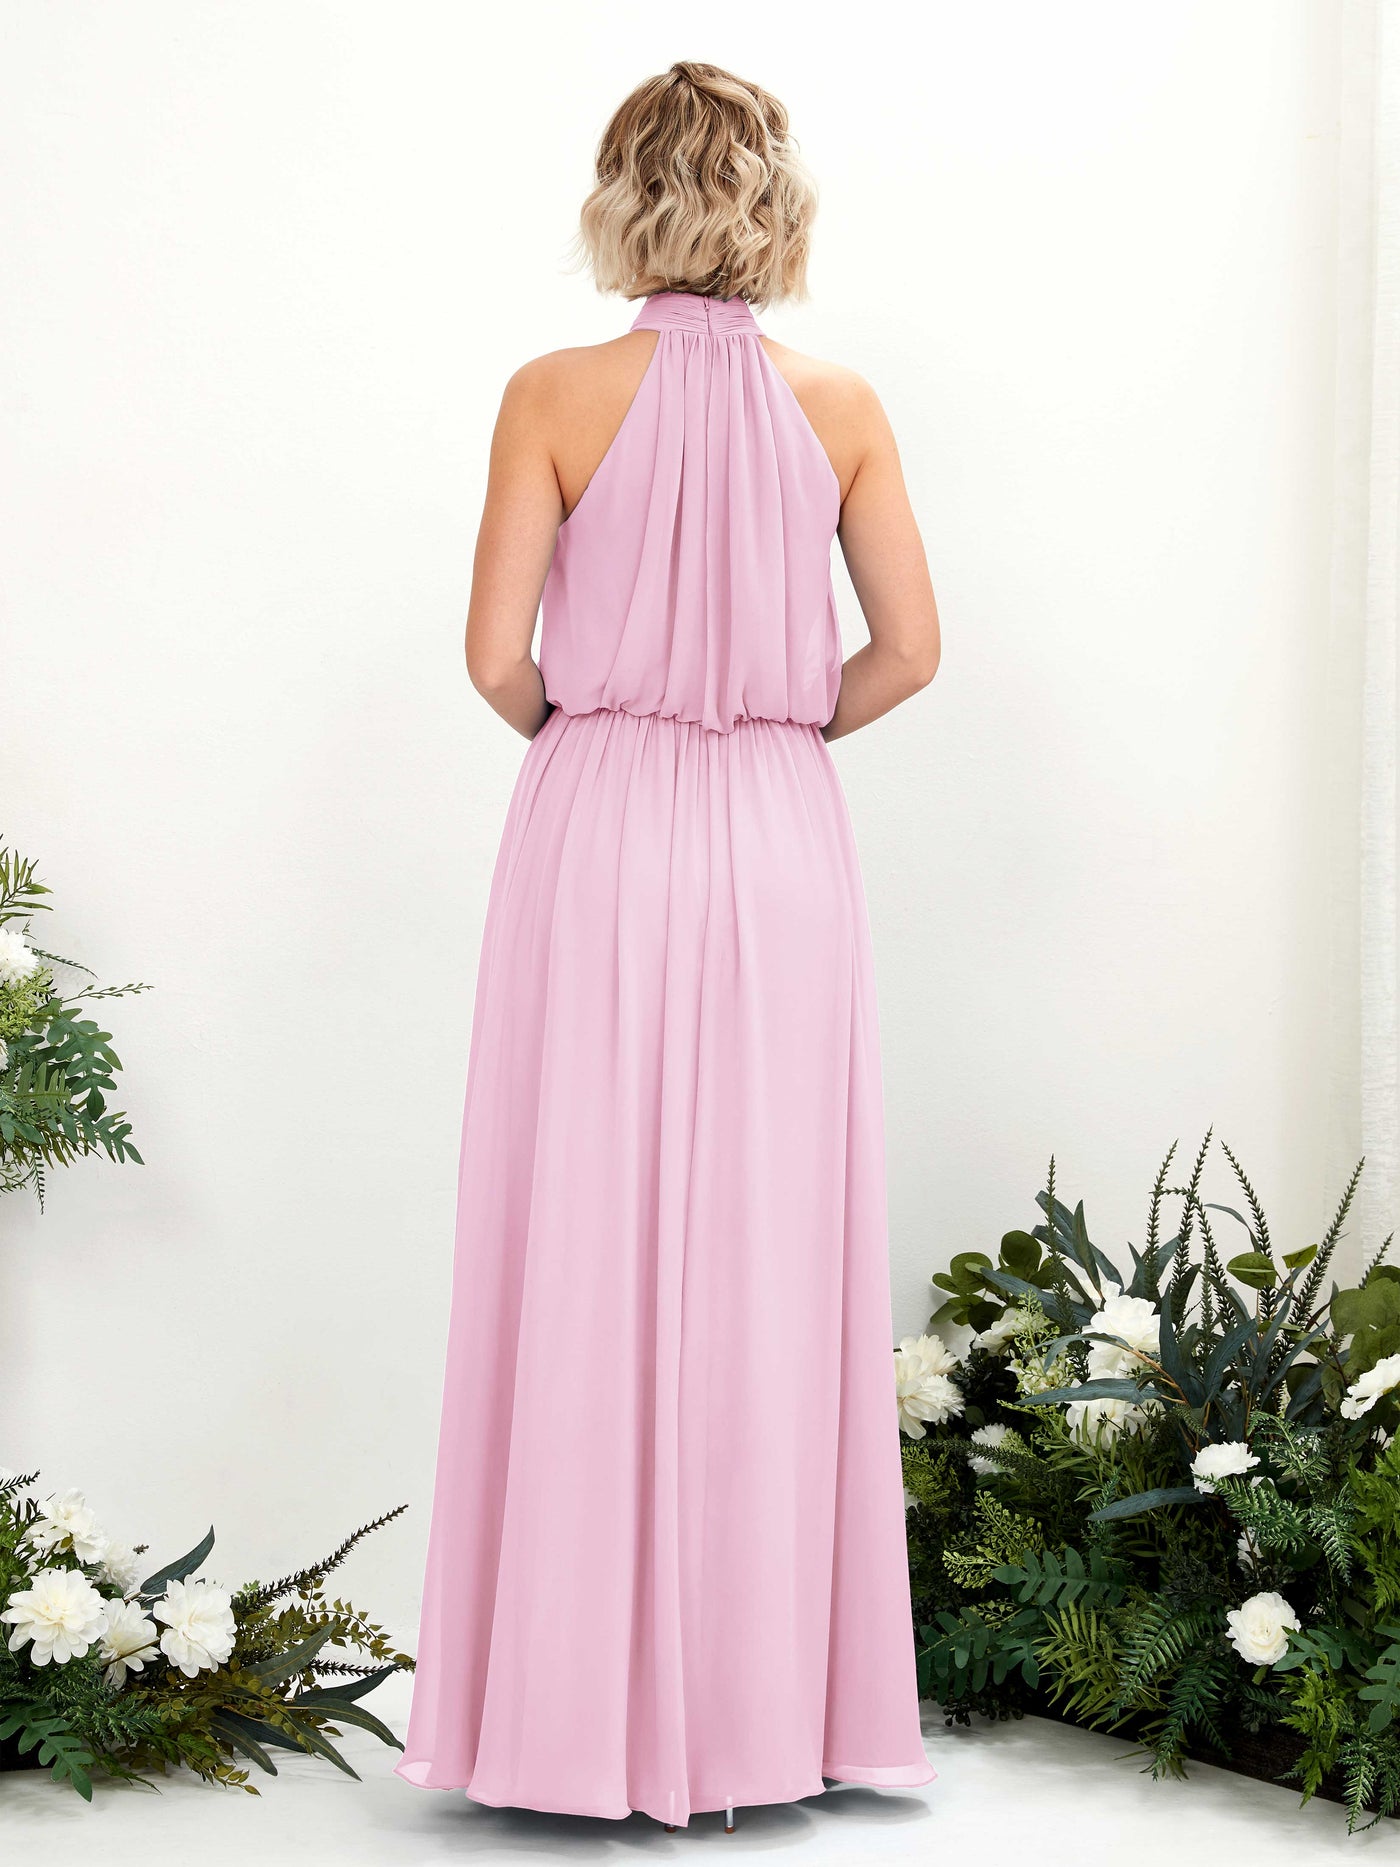 Candy Pink Bridesmaid Dresses Bridesmaid Dress A-line Chiffon Halter Full Length Sleeveless Wedding Party Dress (81222939)#color_candy-pink